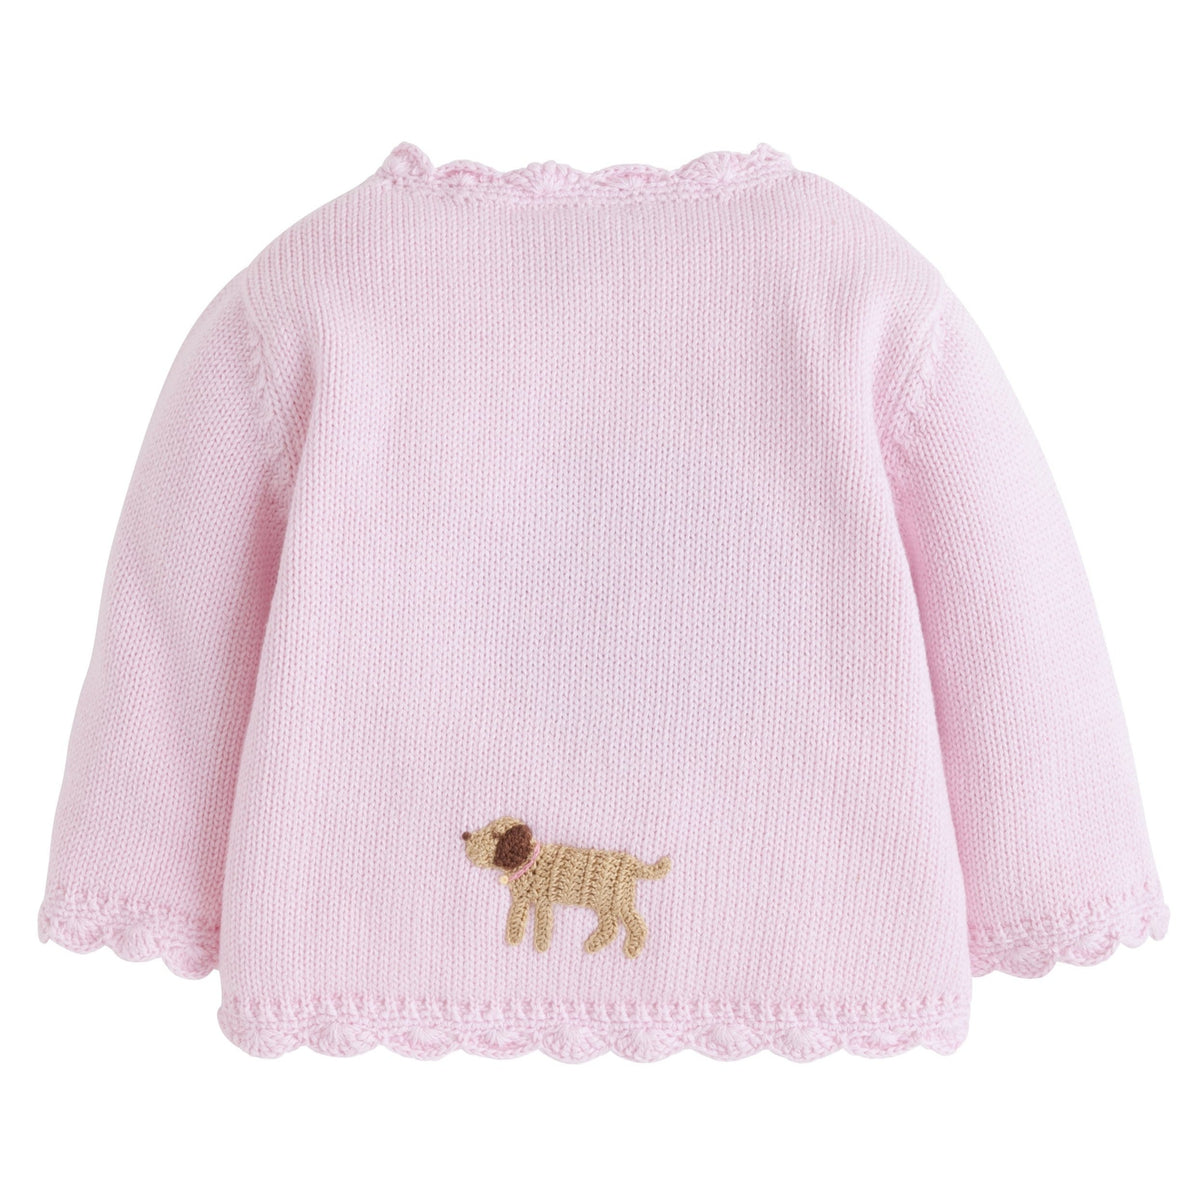 seguridadindustrialcr traditional crochet sweater, pink lab crochet sweater for baby girl